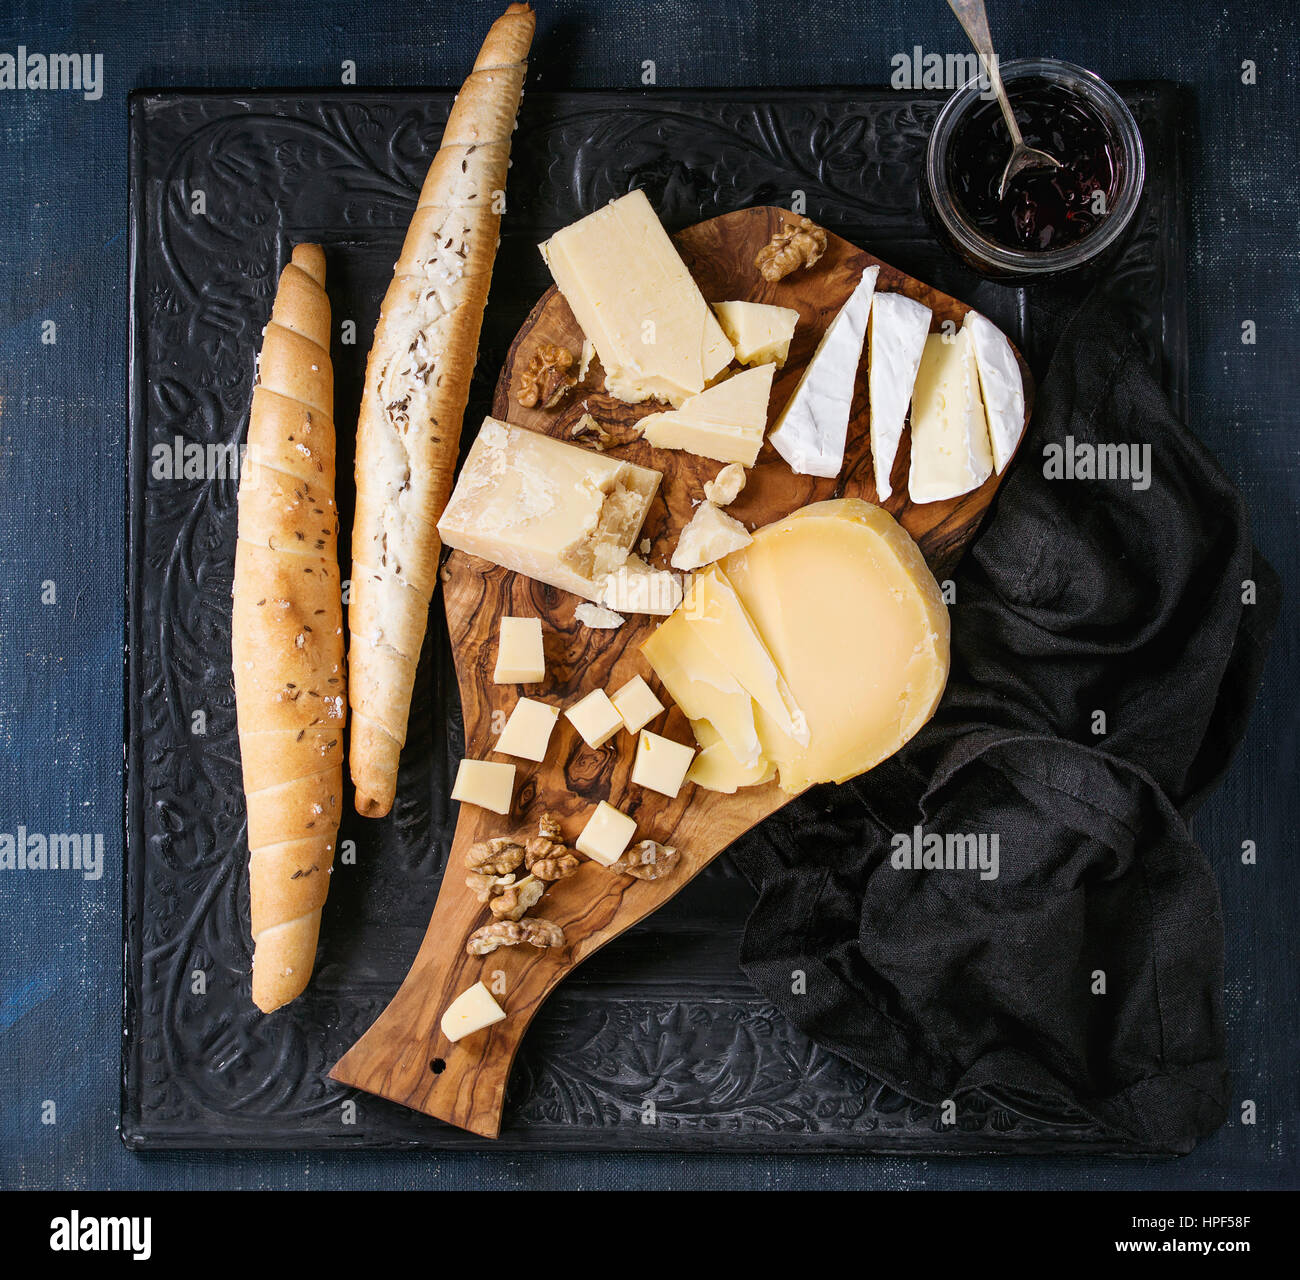 Cheese plate. Assortment of cheese with walnuts, jam and bread on olive wood serving board with textile over black ornate and dark blue canvas as back Stock Photo